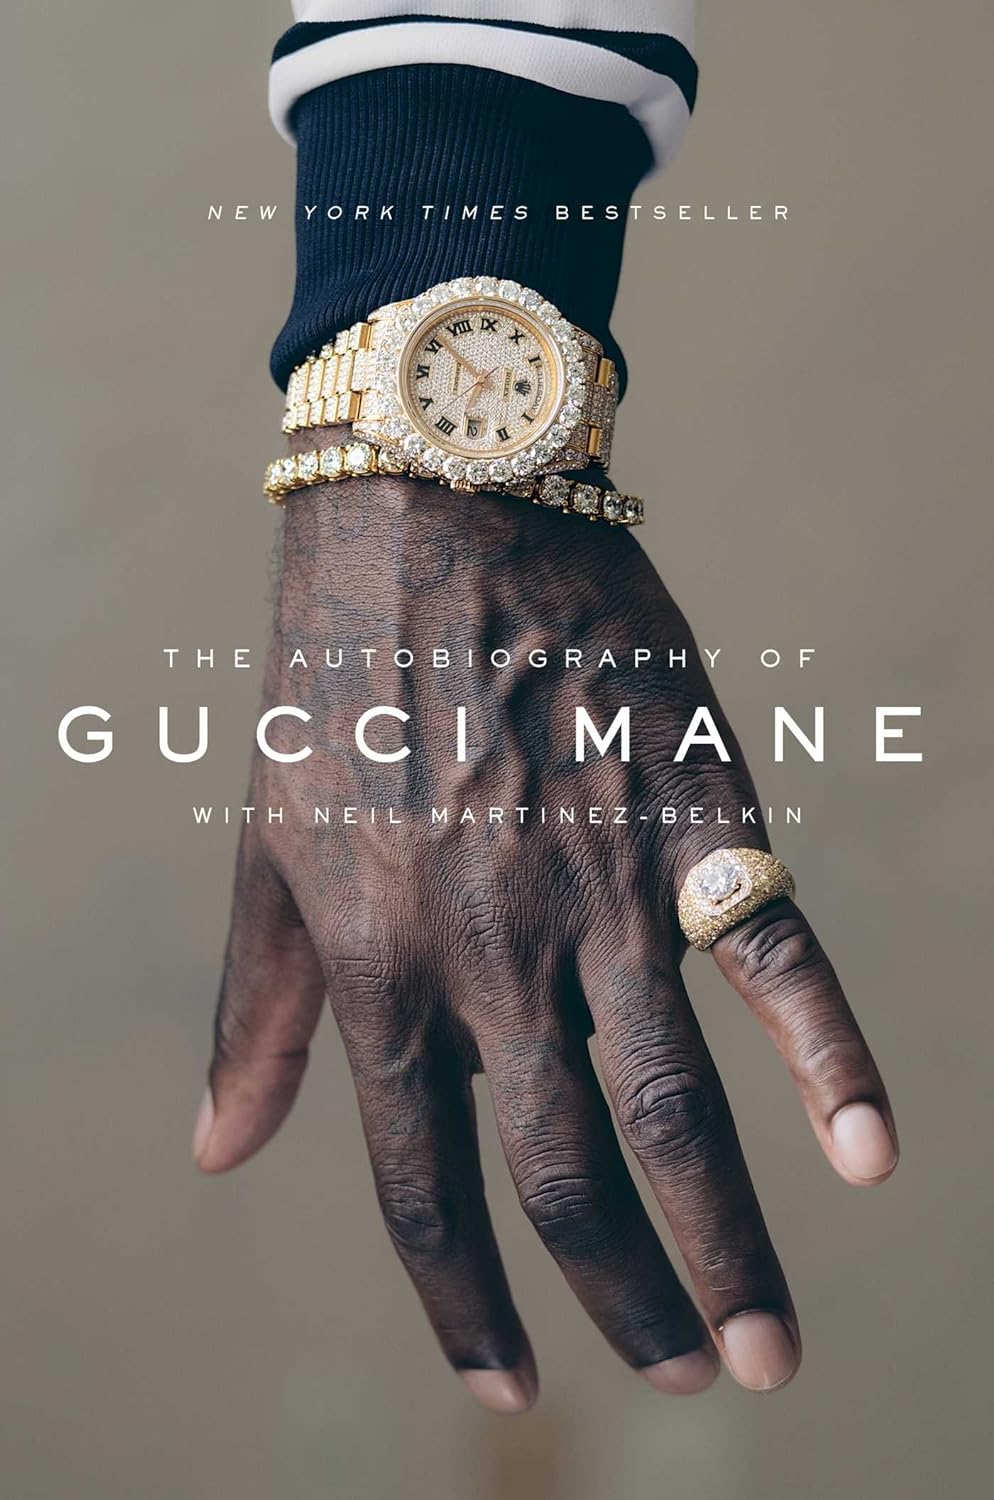 The Autobiography of Gucci Mane Hardcover – September 19, 2017 by Gucci Mane (Author), Neil Martin